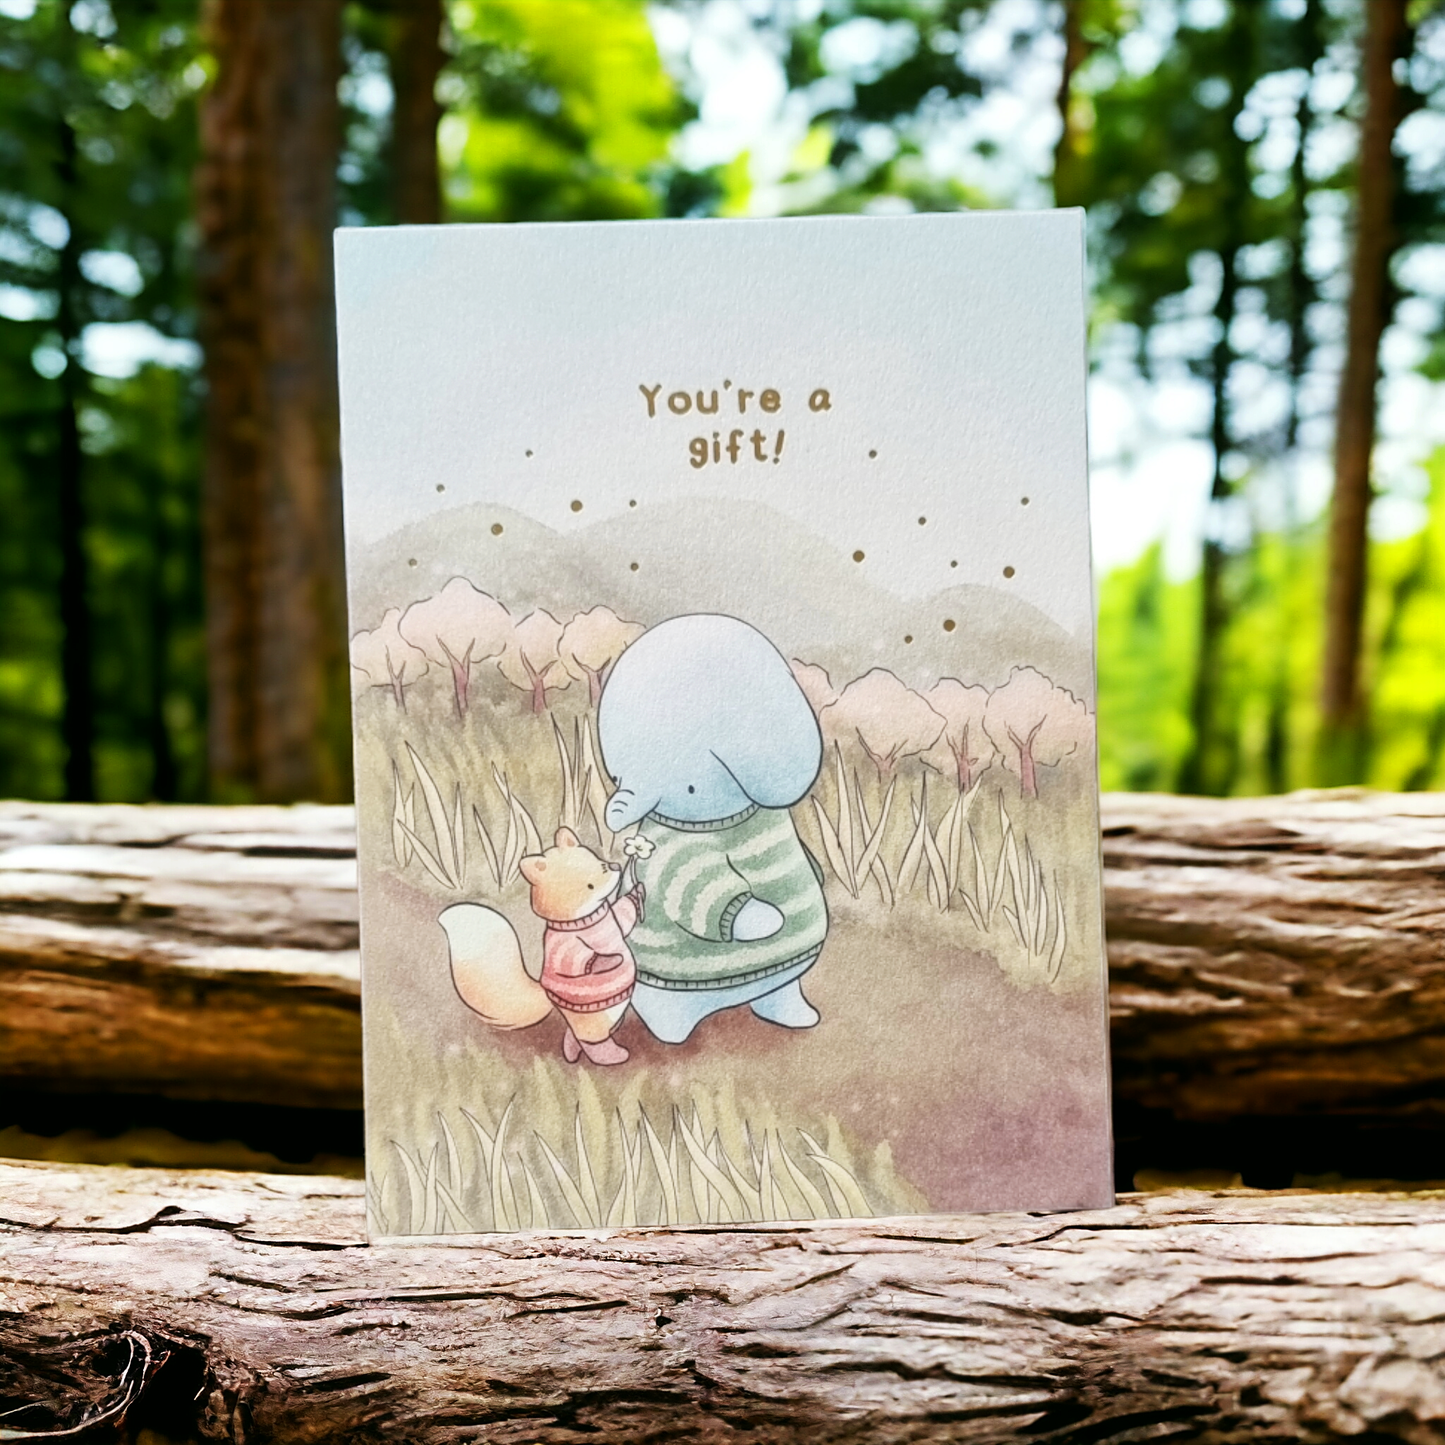 'You're a Gift!' Postcard